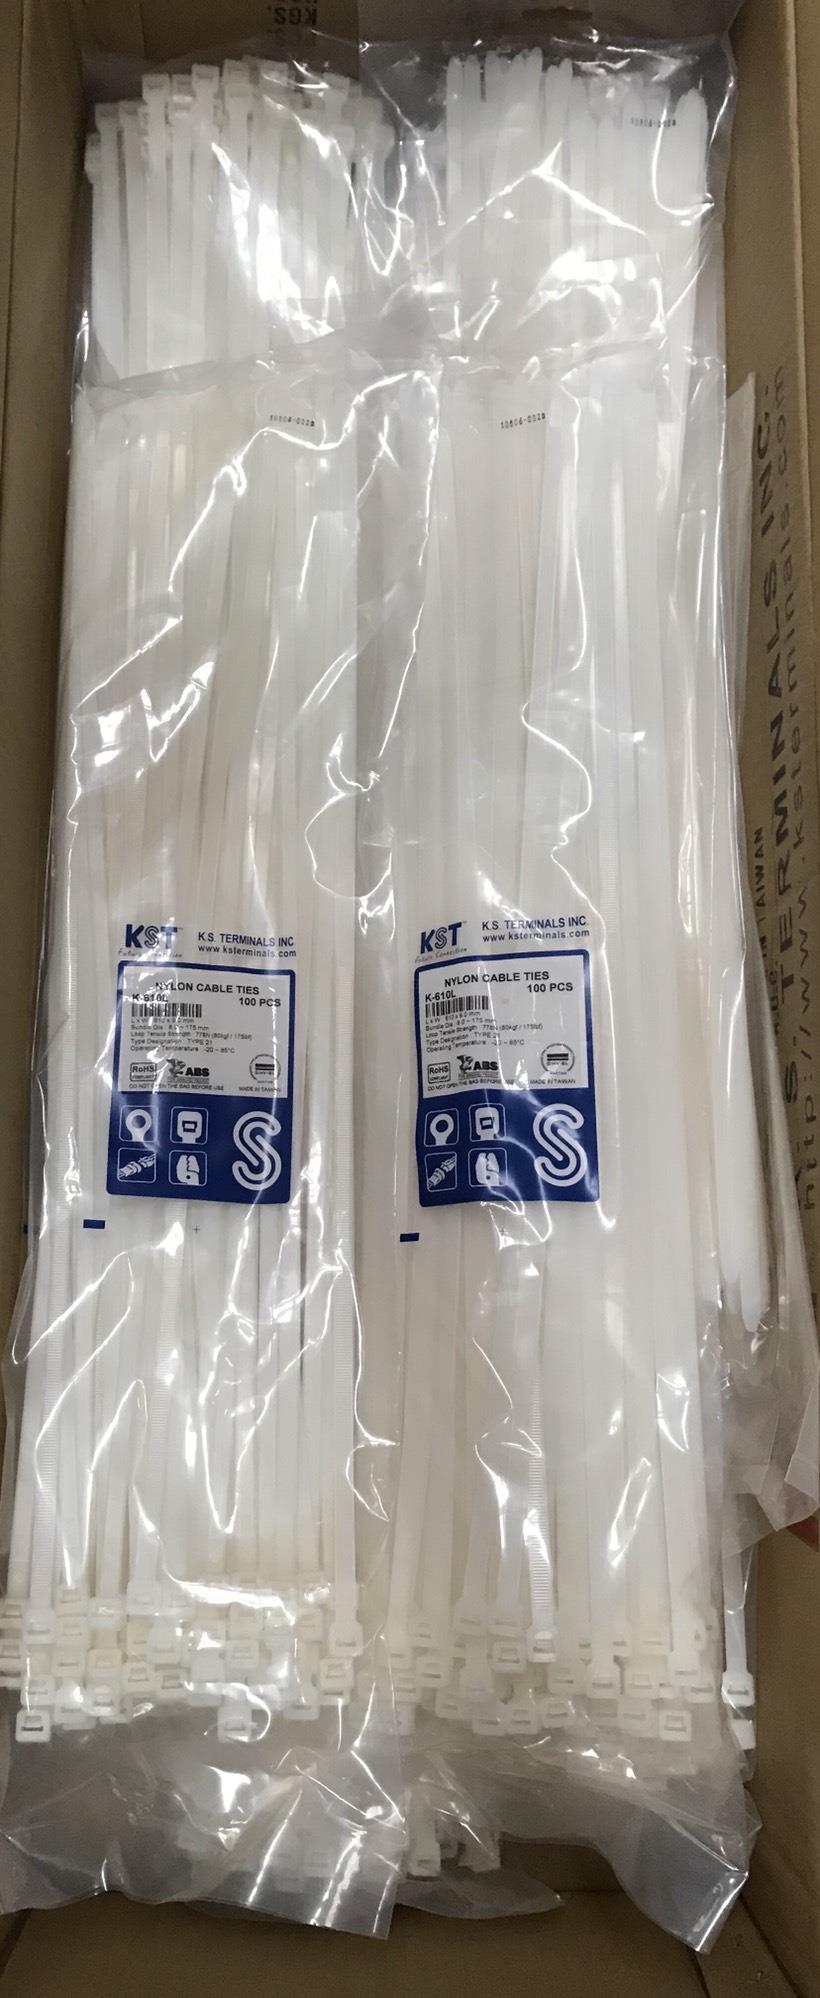 K-1220L cable ties 48" 